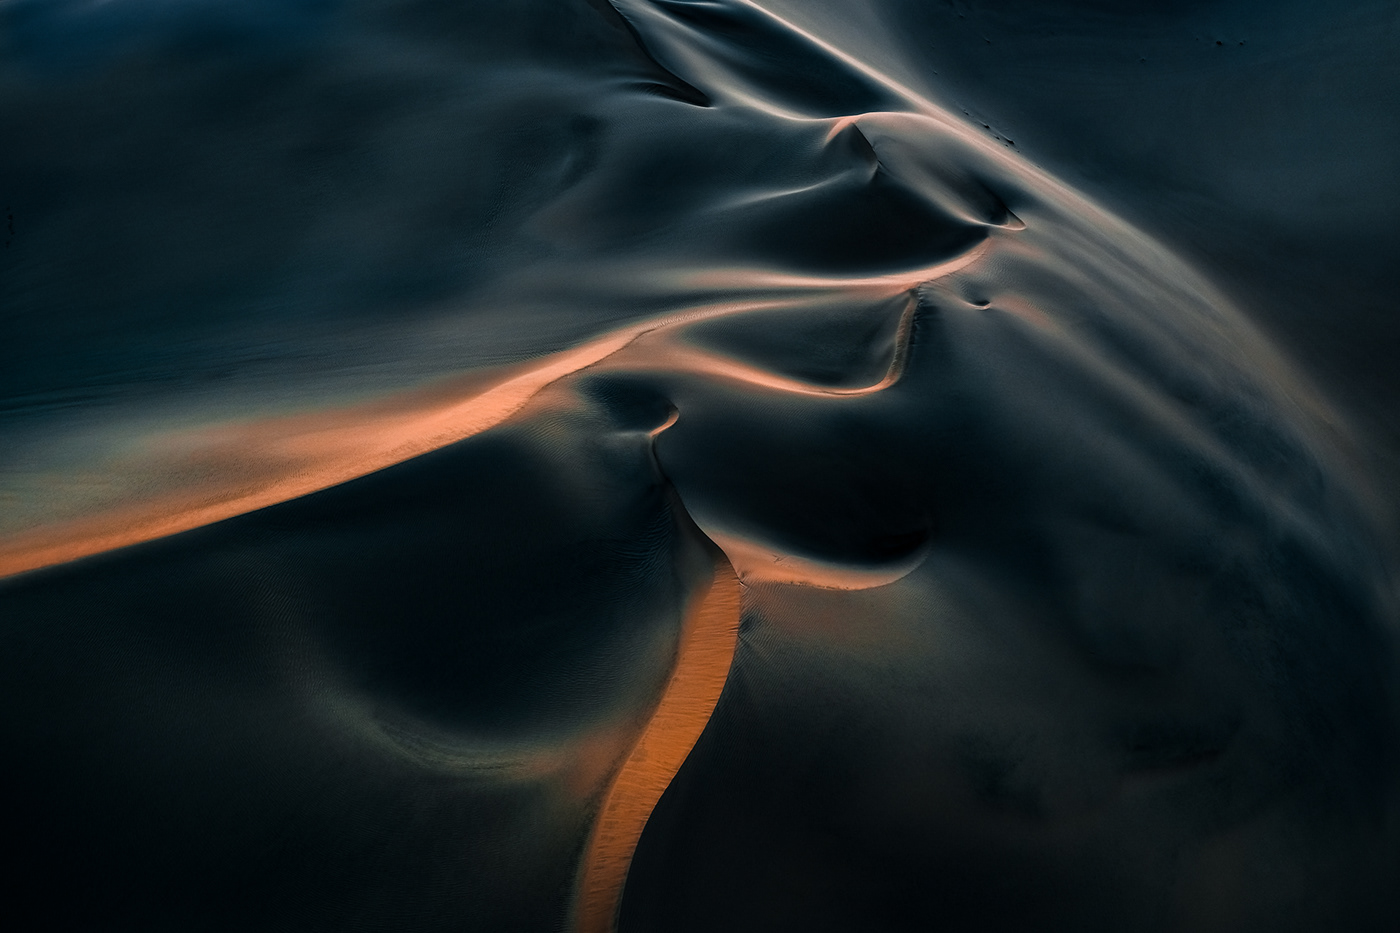 Aerial Aerial Photography abstract africa Golden Light Namibia Photography  sand sand dunes sanddunes